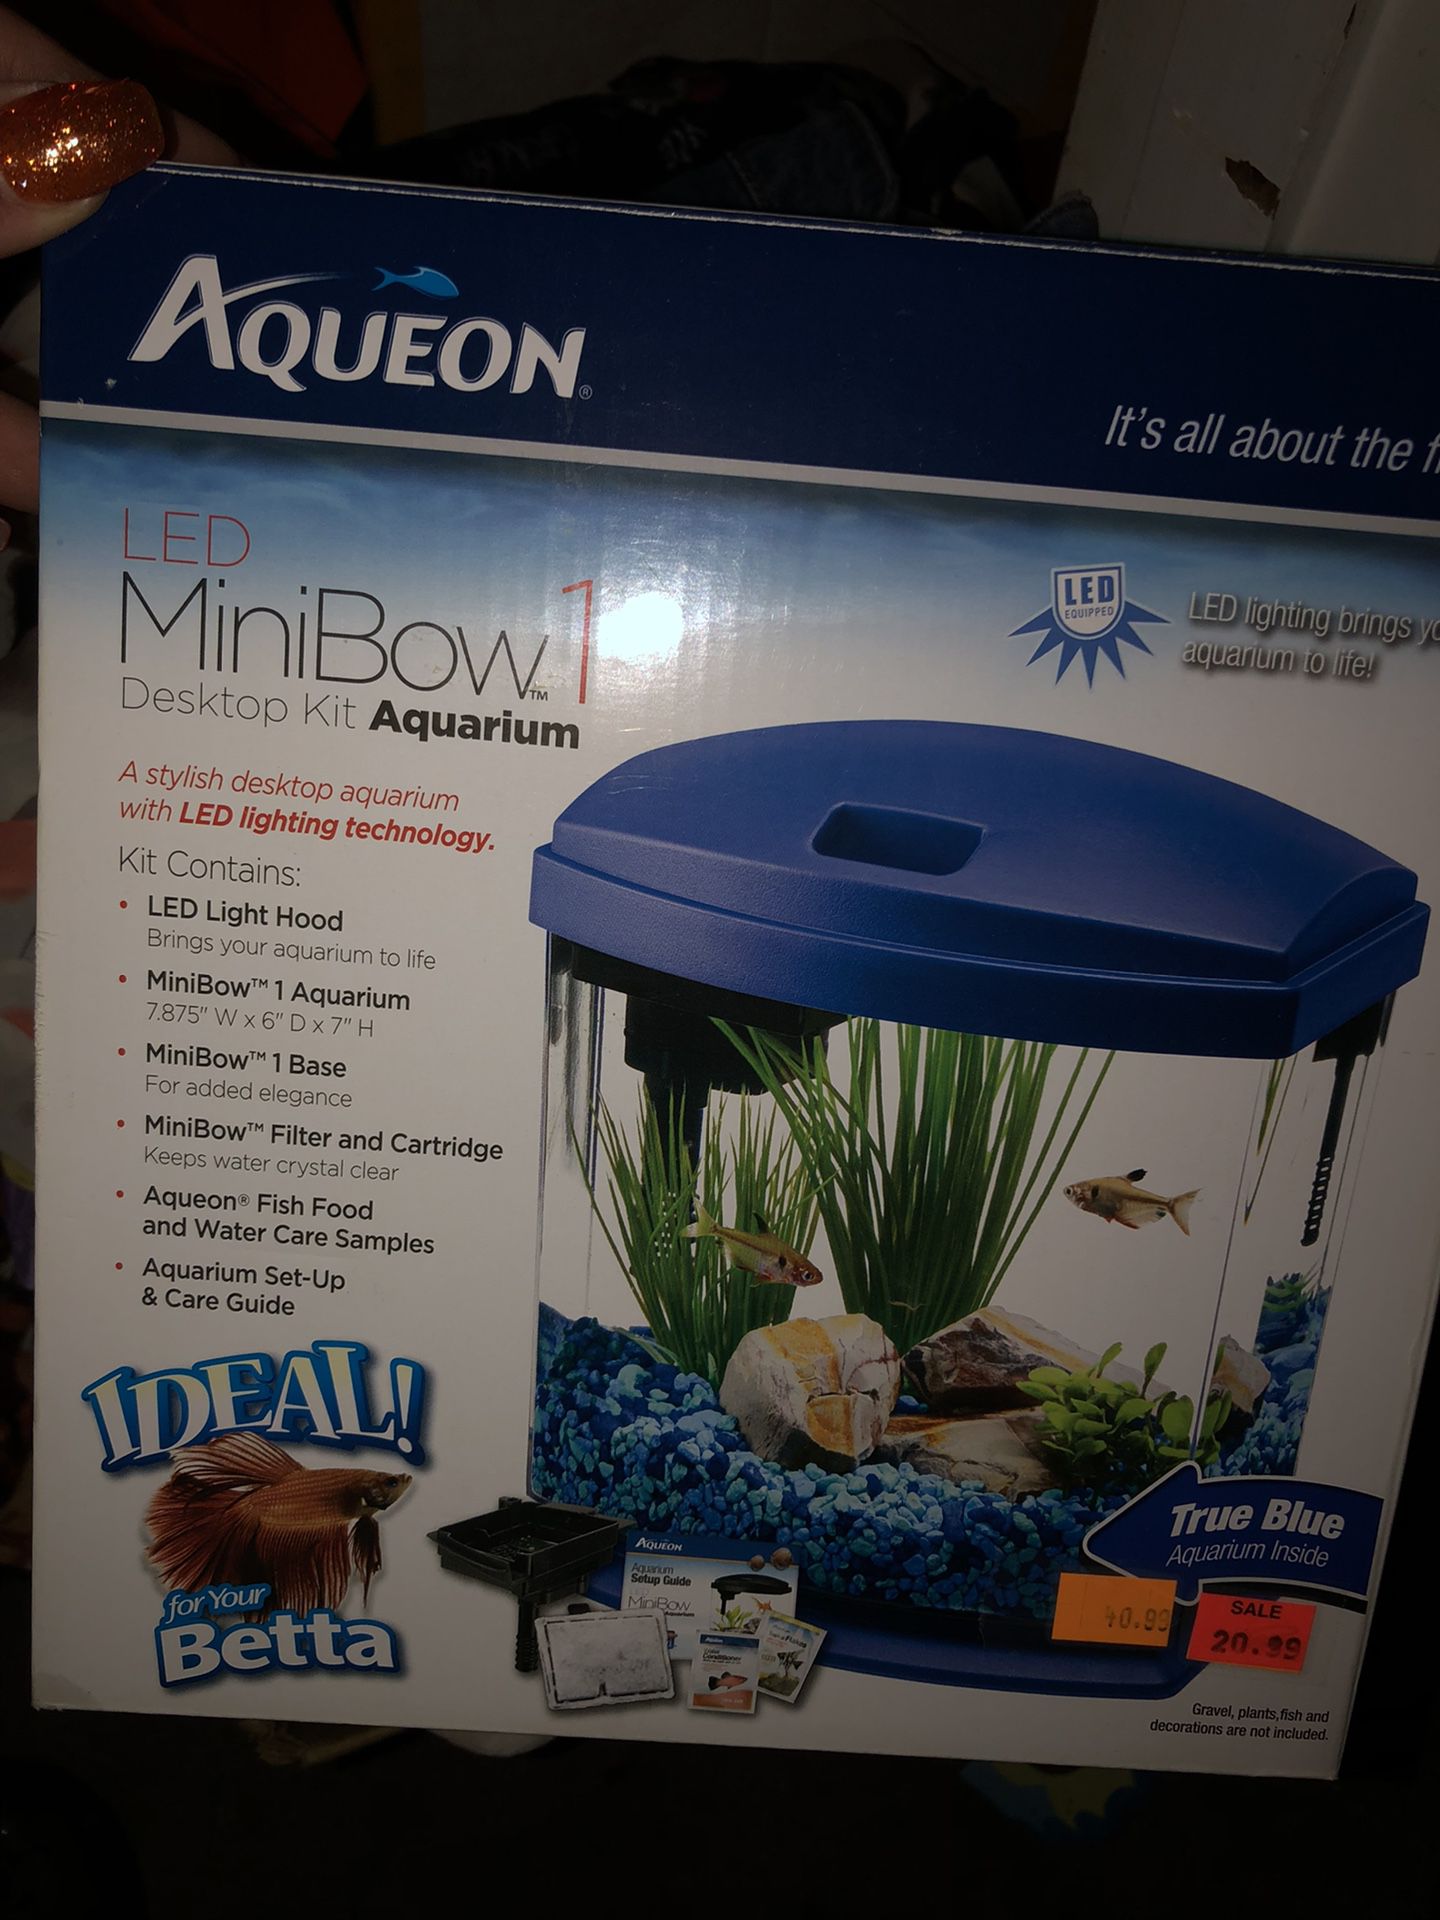 Everything for a betta fish!